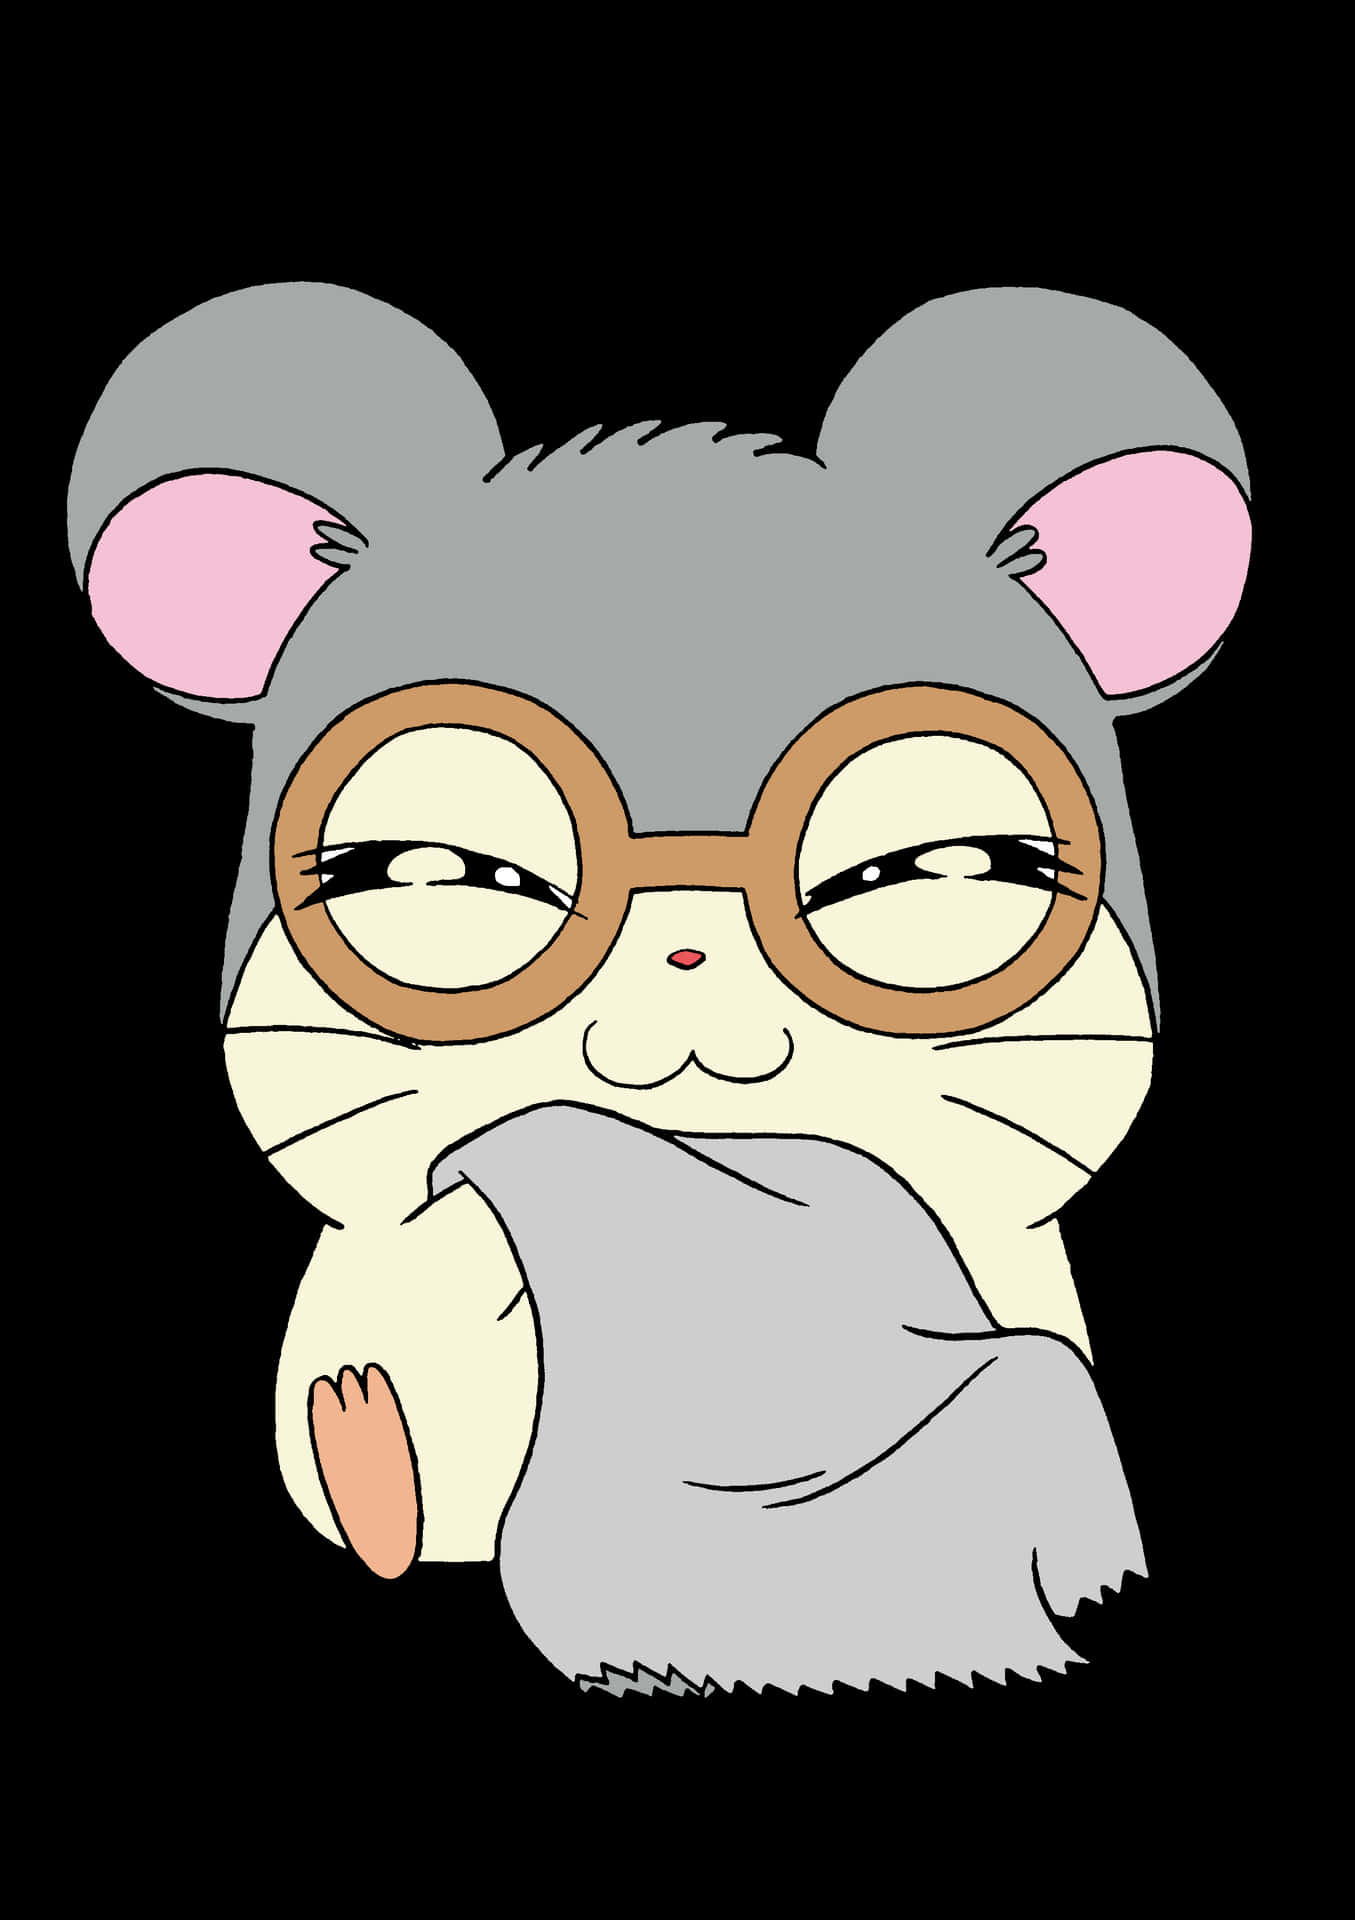 a cartoon mouse wearing glasses and holding a scarf